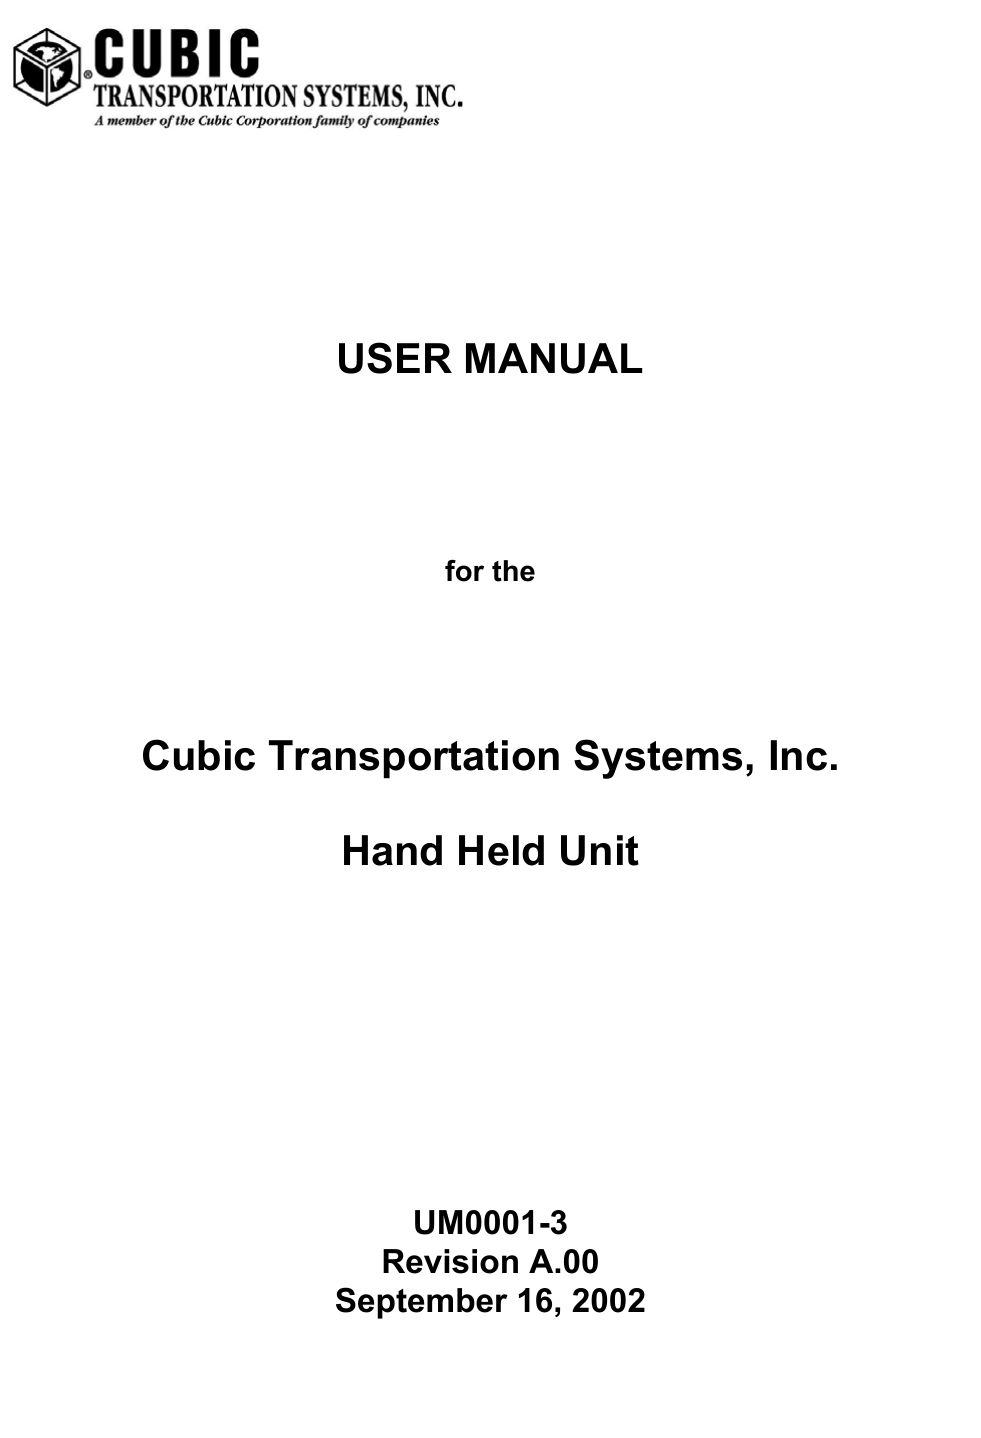            USER MANUAL   for the   Cubic Transportation Systems, Inc.  Hand Held Unit           UM0001-3 Revision A.00 September 16, 2002 